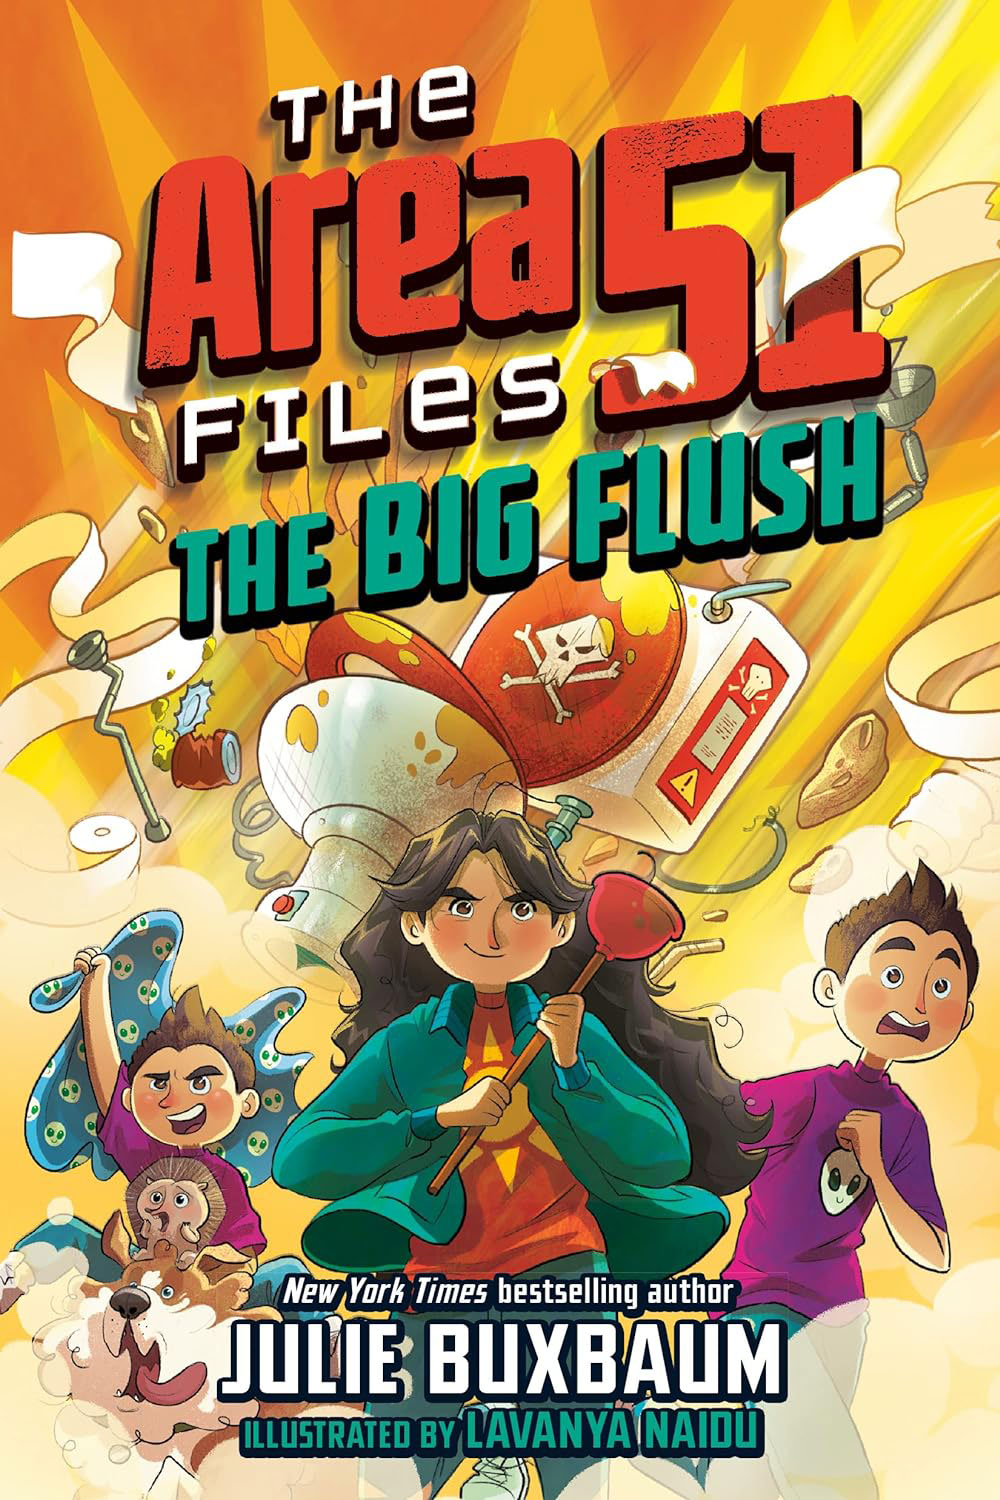 Book cover for The Area 51 Files: The Big Flush by Julie Buxbaum